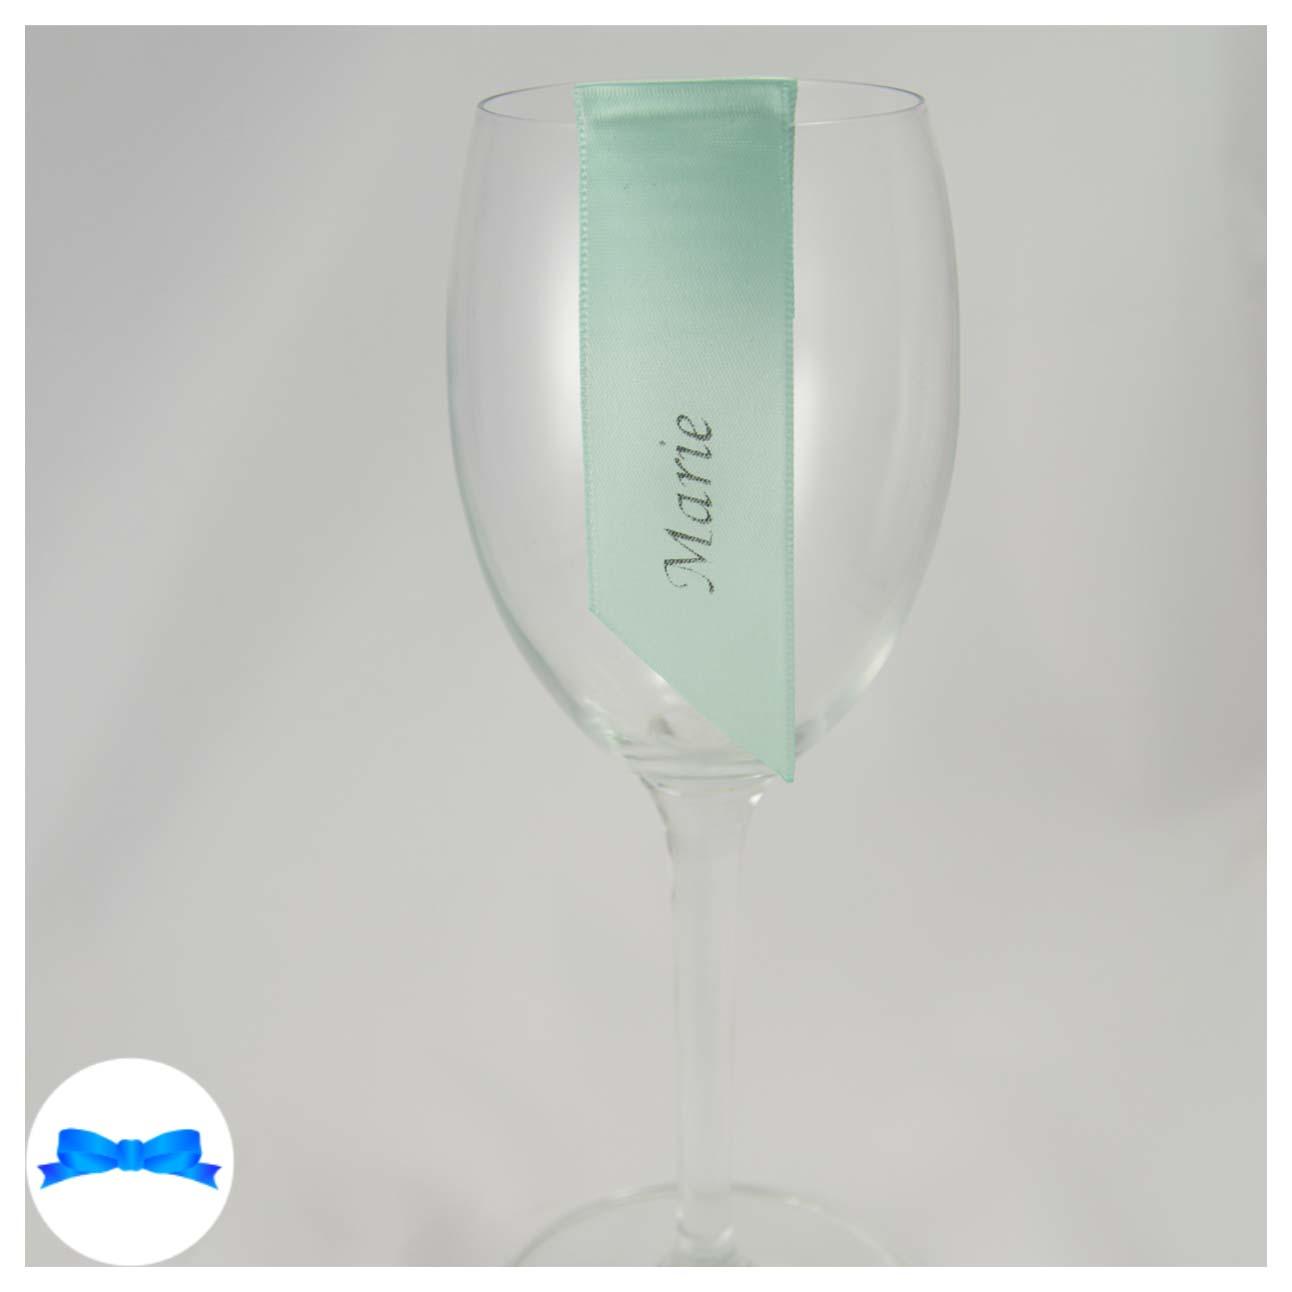 Guest name wine glass ribbons Mint and black